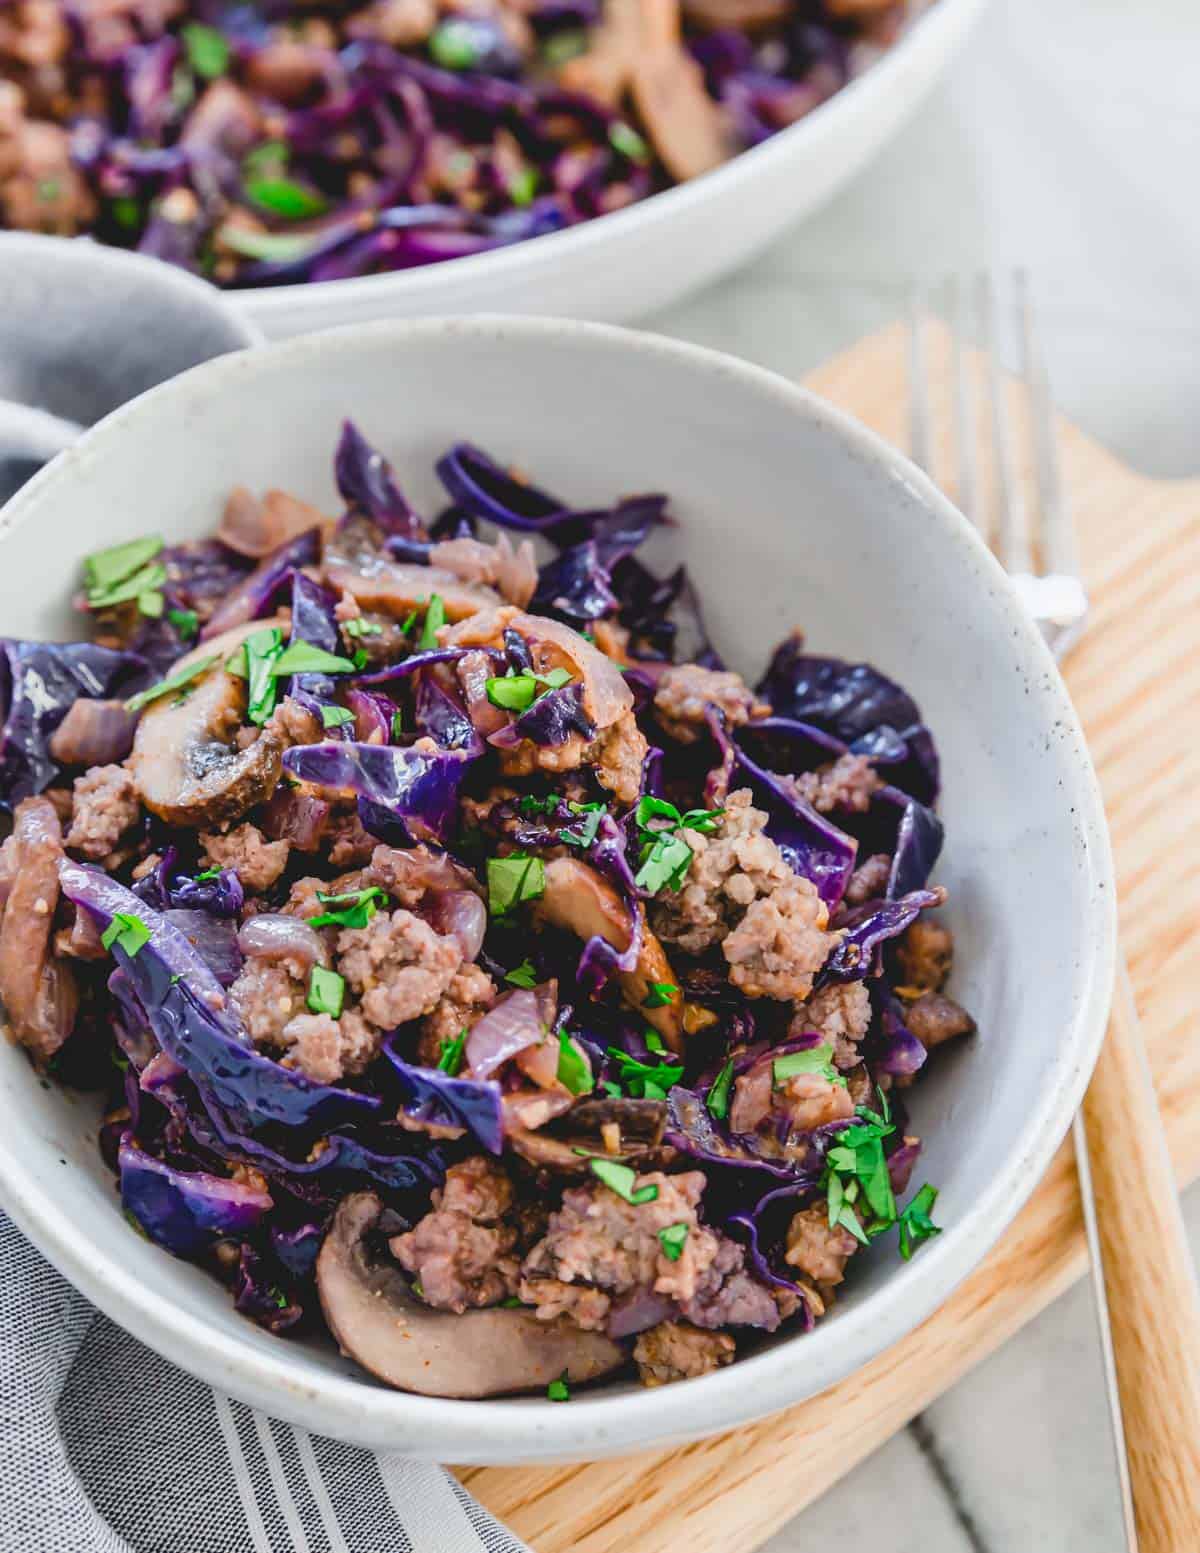 Pork and cabbage stir fry in a ceramic bowl on a cutting board.